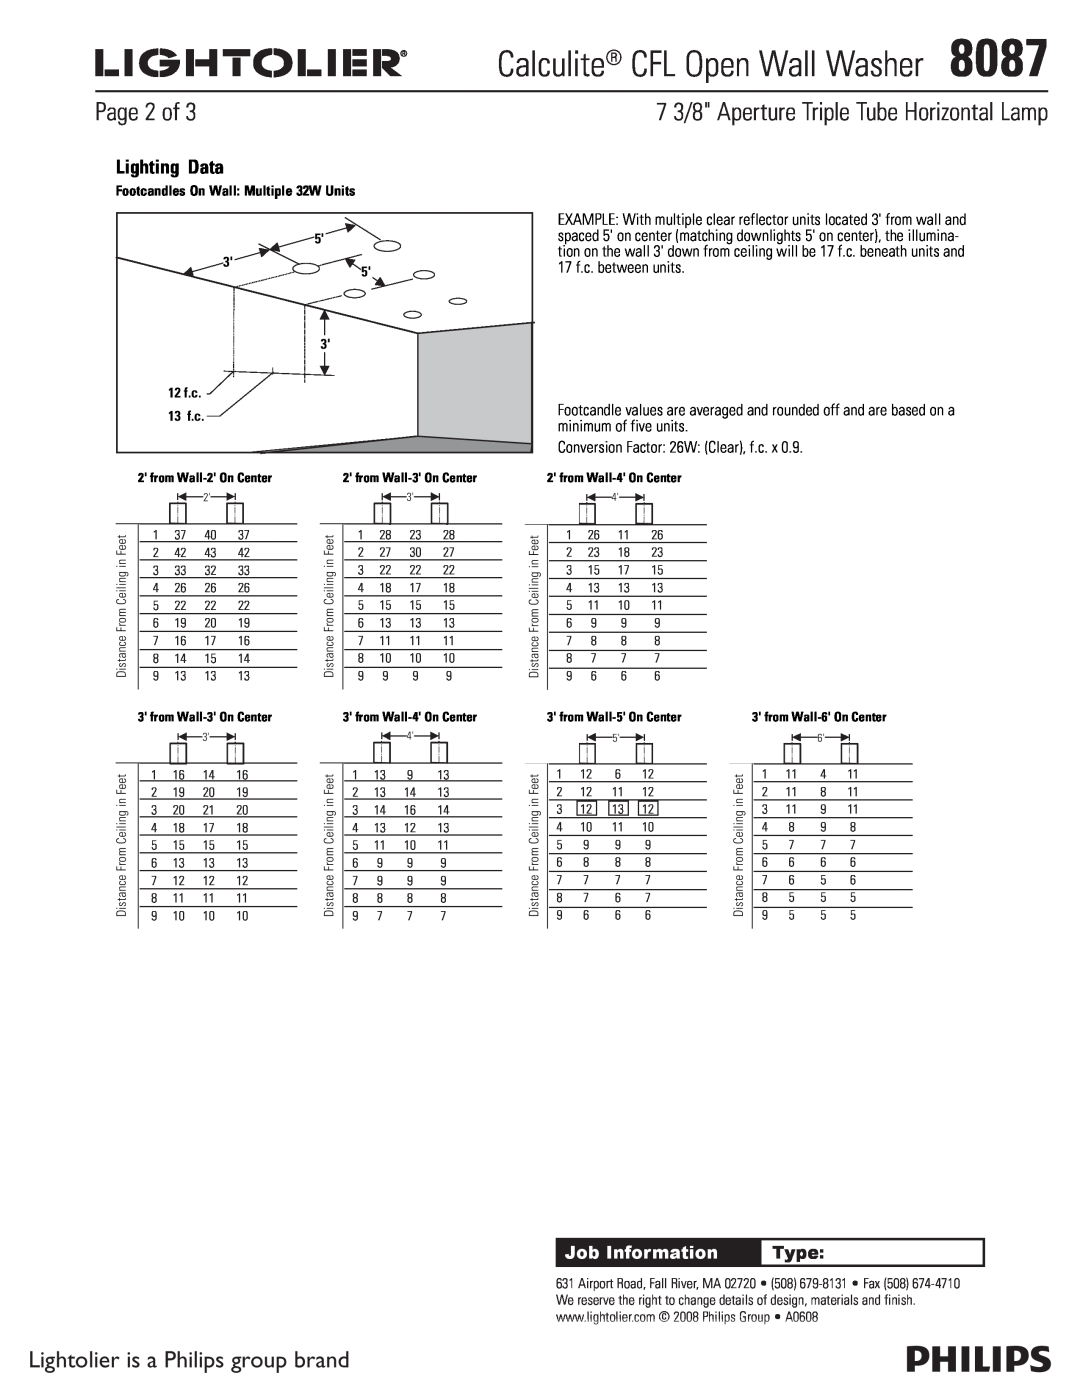 Lightolier 7 3/8 Aperture Triple Tube Horizontal Lamp, Page 2 of, Lighting Data, Calculite CFL Open Wall Washer8087 